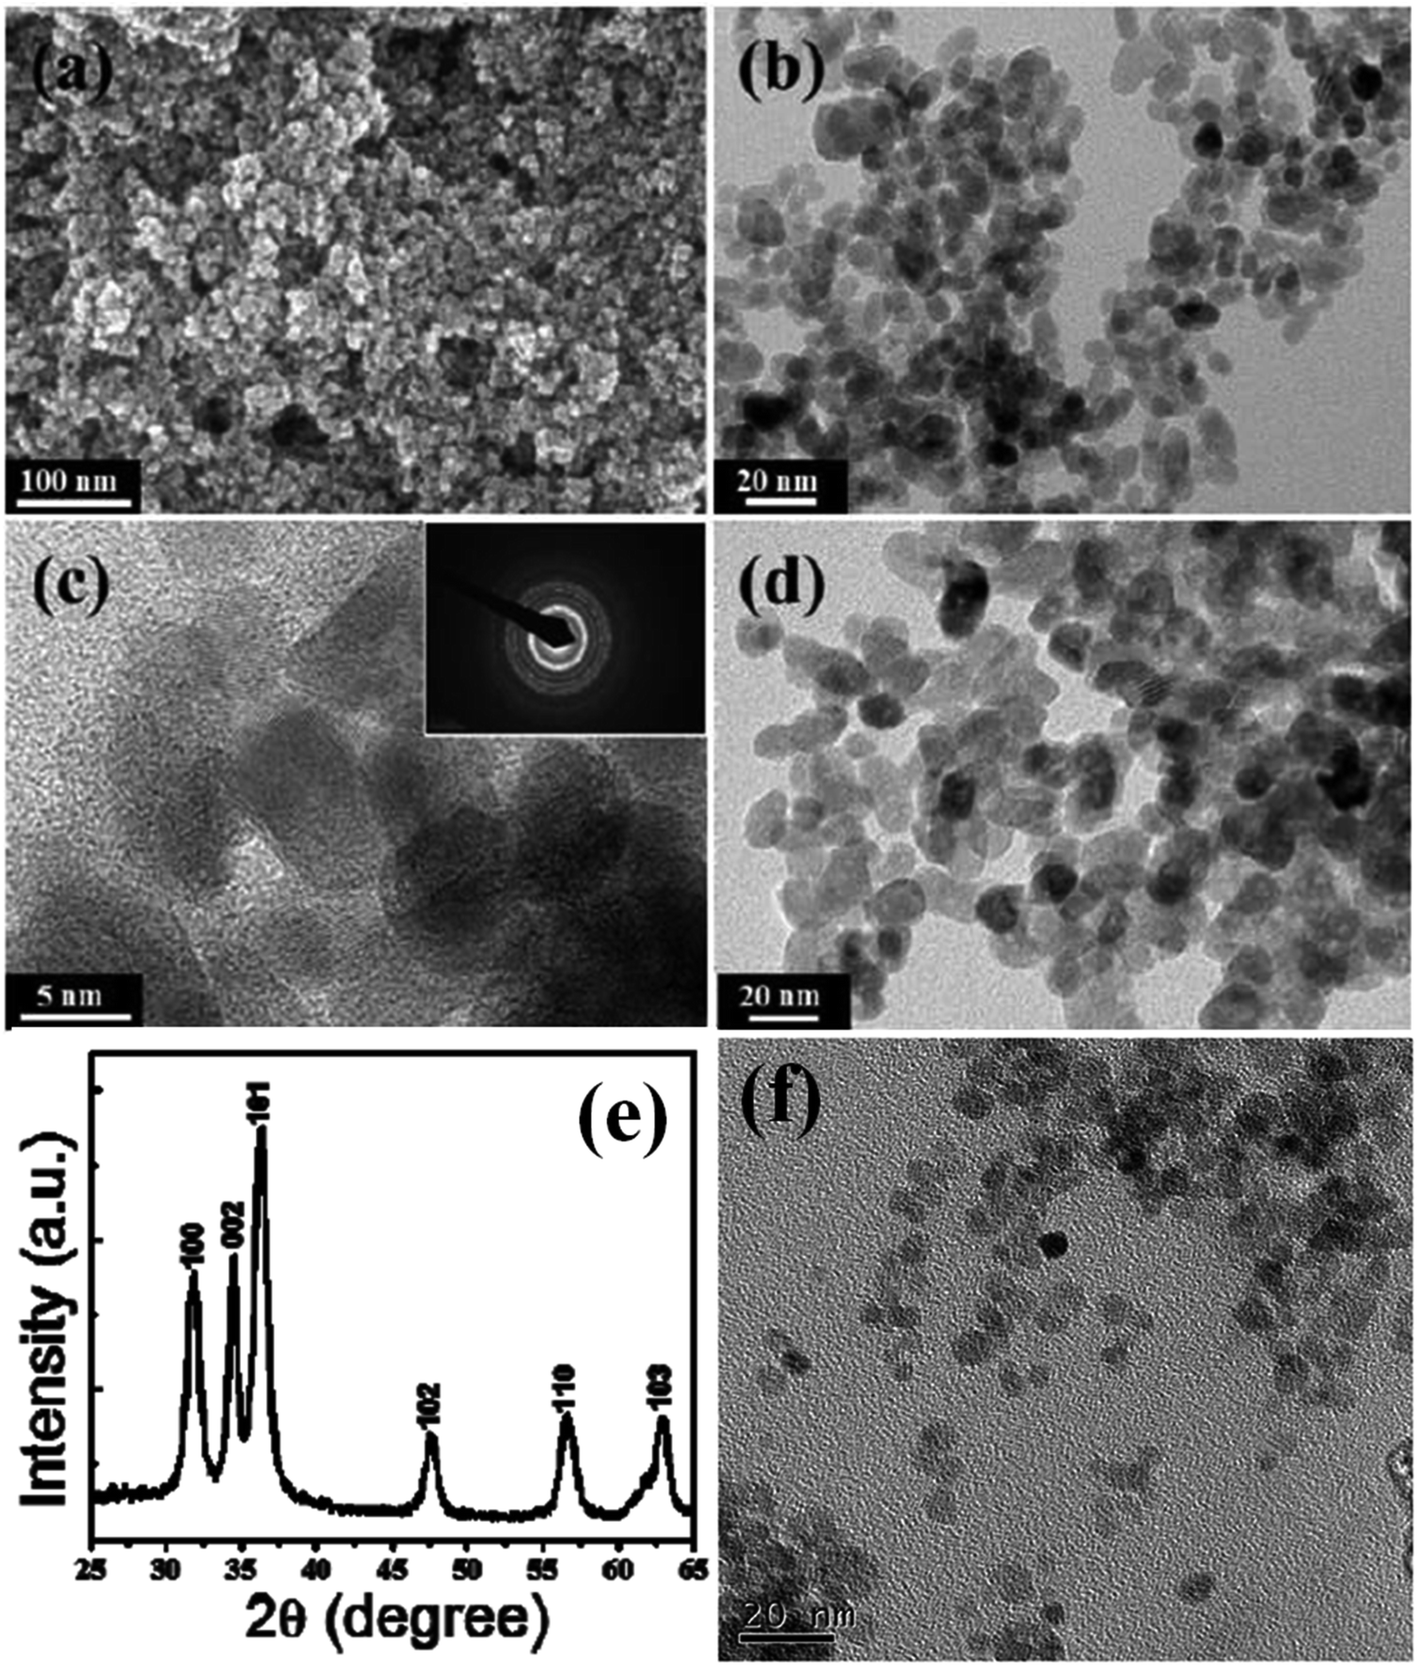 Journey Of Zno Quantum Dots From Undoped To Rare Earth And Transition Metal Doped And Their Applications Rsc Advances Rsc Publishing Doi 10 1039 D0rac